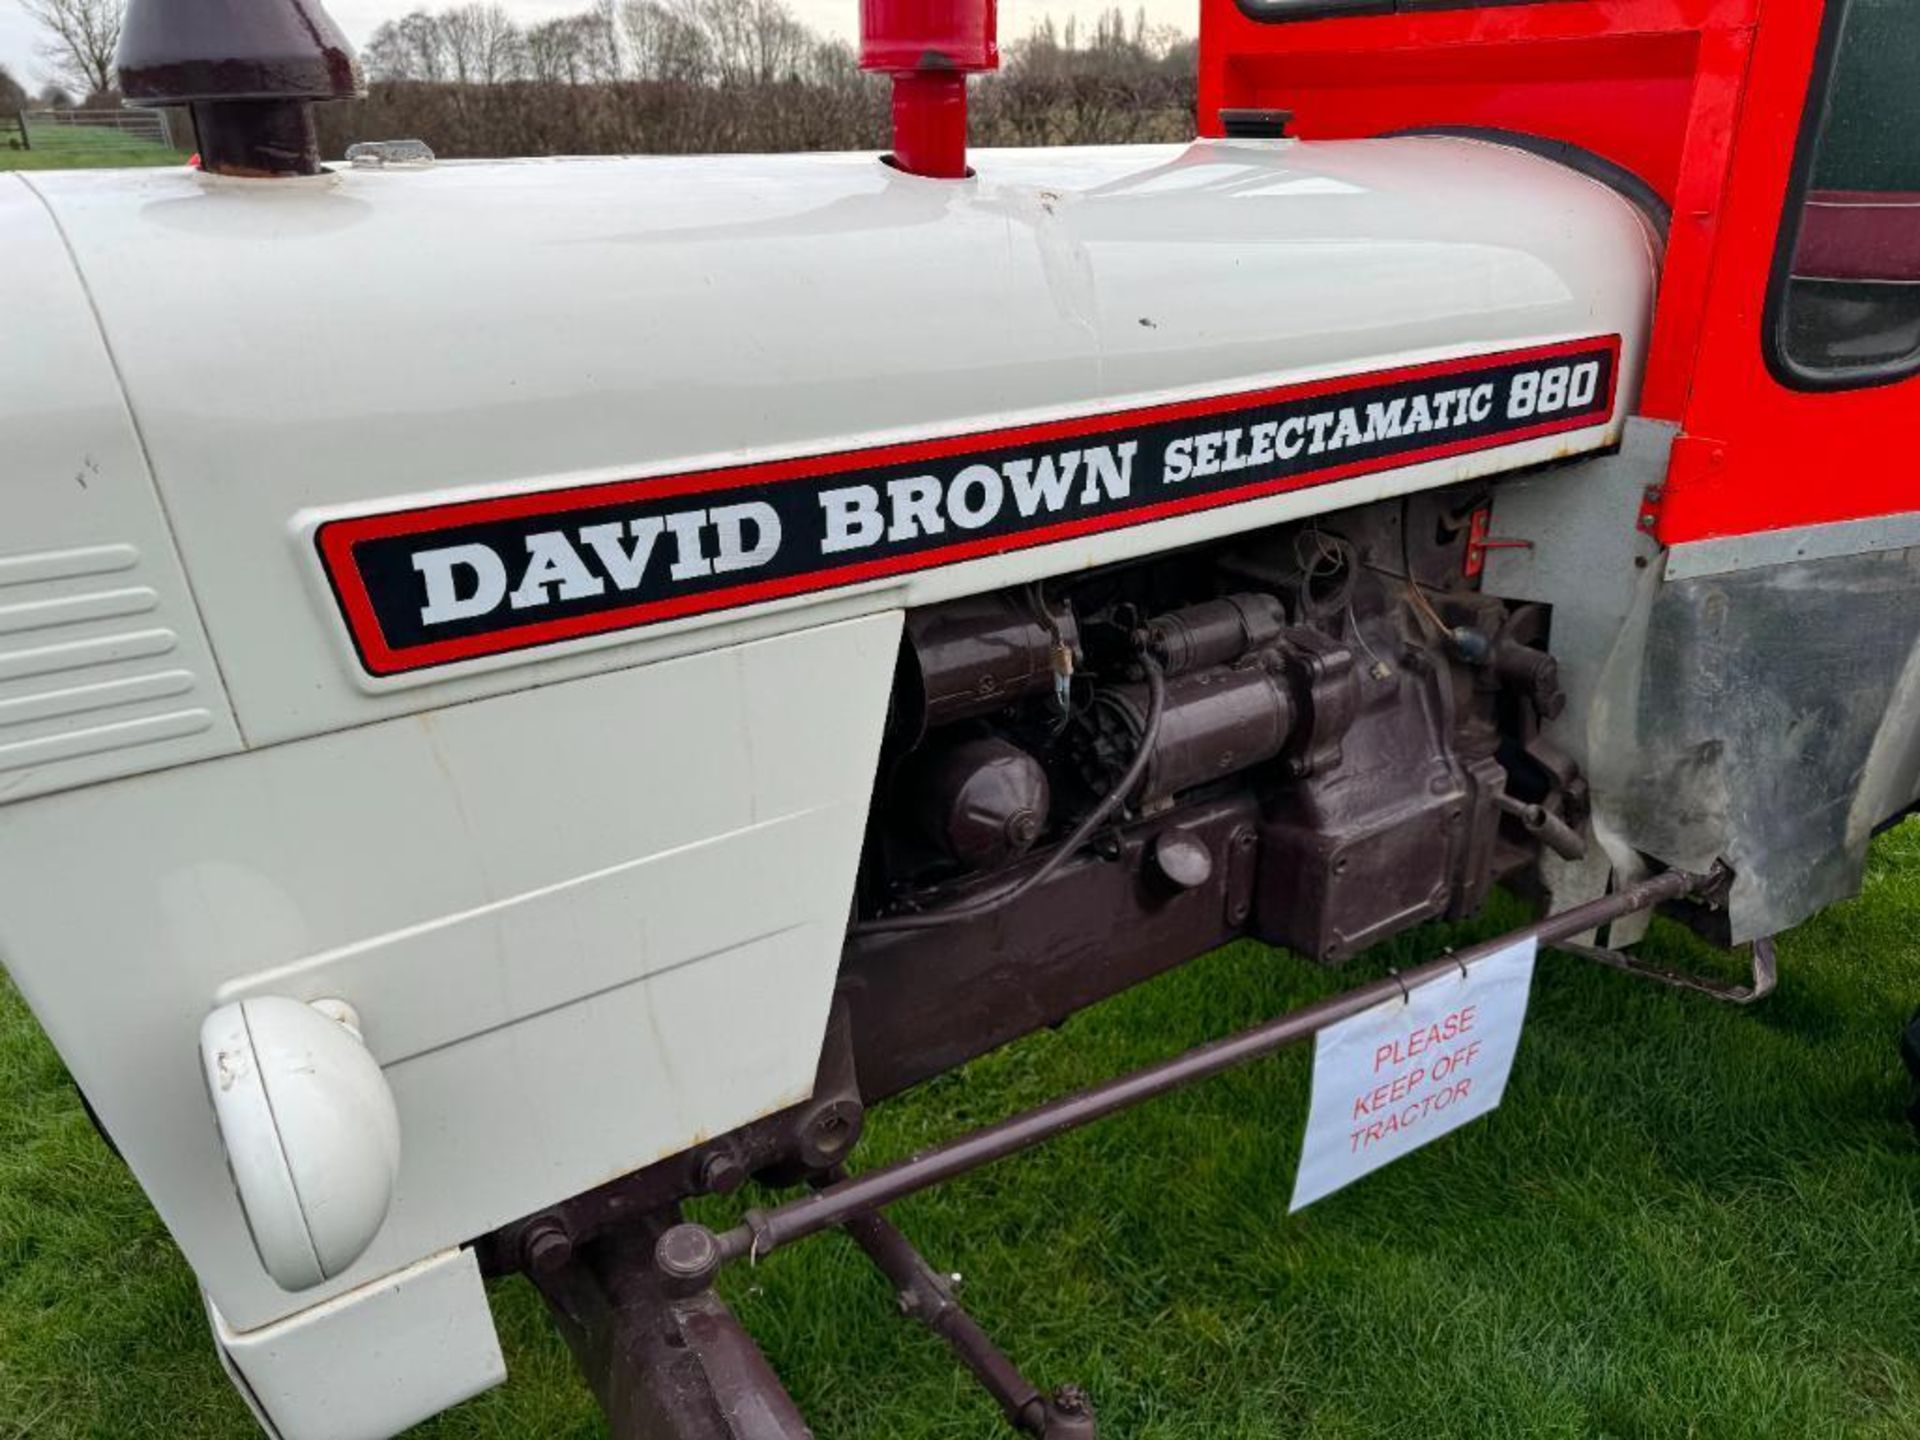 1968 David Brown 880 Selectamatic 2wd diesel tractor with canvas cab, rear hydraulic valve, PTO, rea - Image 5 of 19